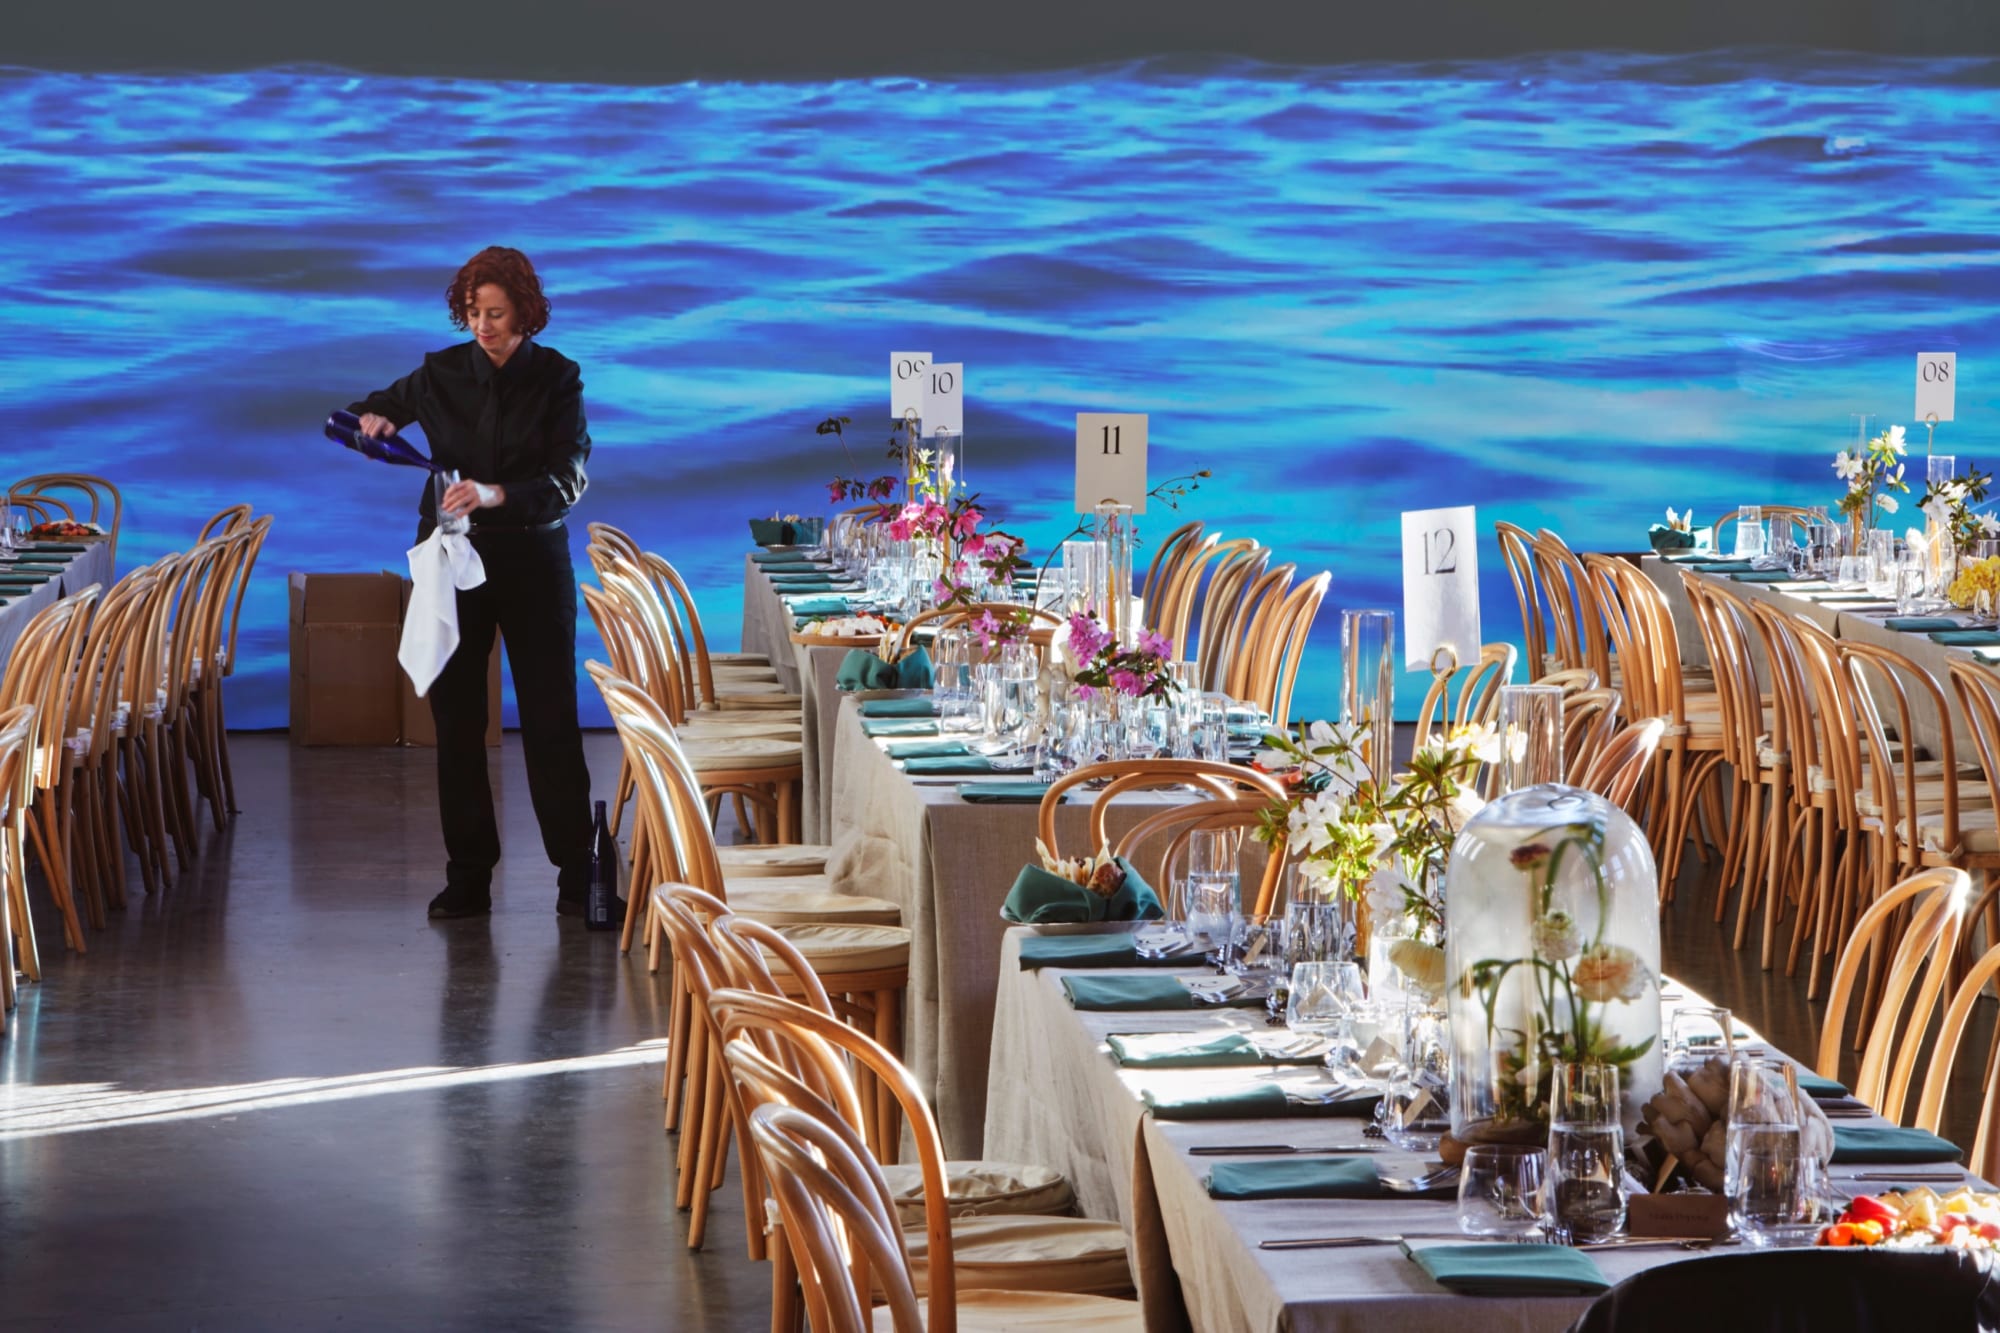 Foreground: white table clothed tables with numbers suggesting a gala event, though no one is seated at them yet. Middleground: a server pours water into a glass. Background: a video of a body of water is projected on a white wall.